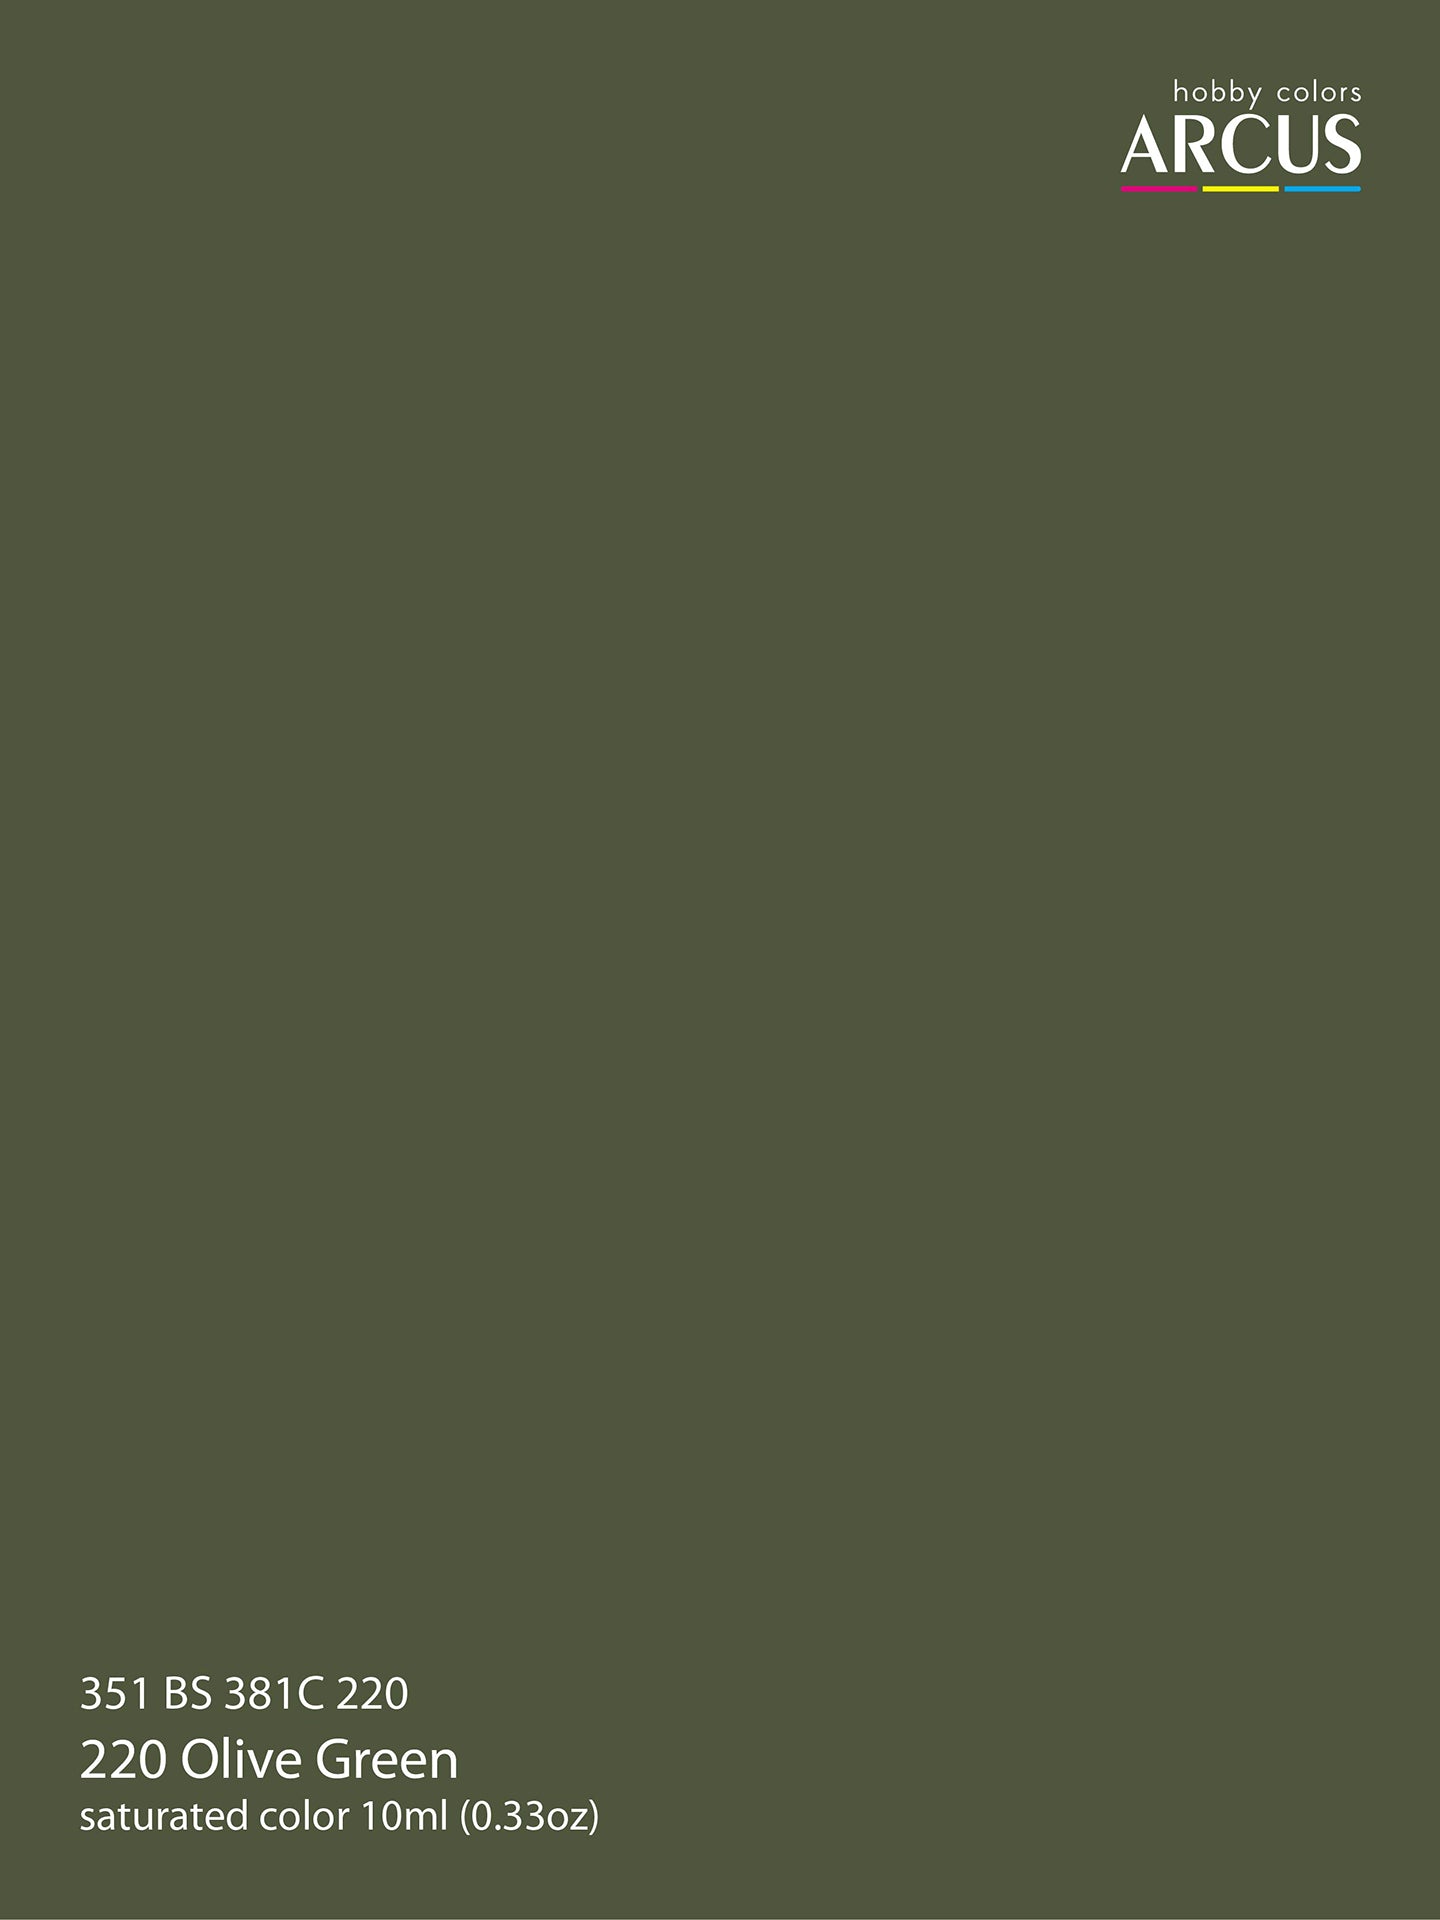 351 BS 381C 220 Olive Green